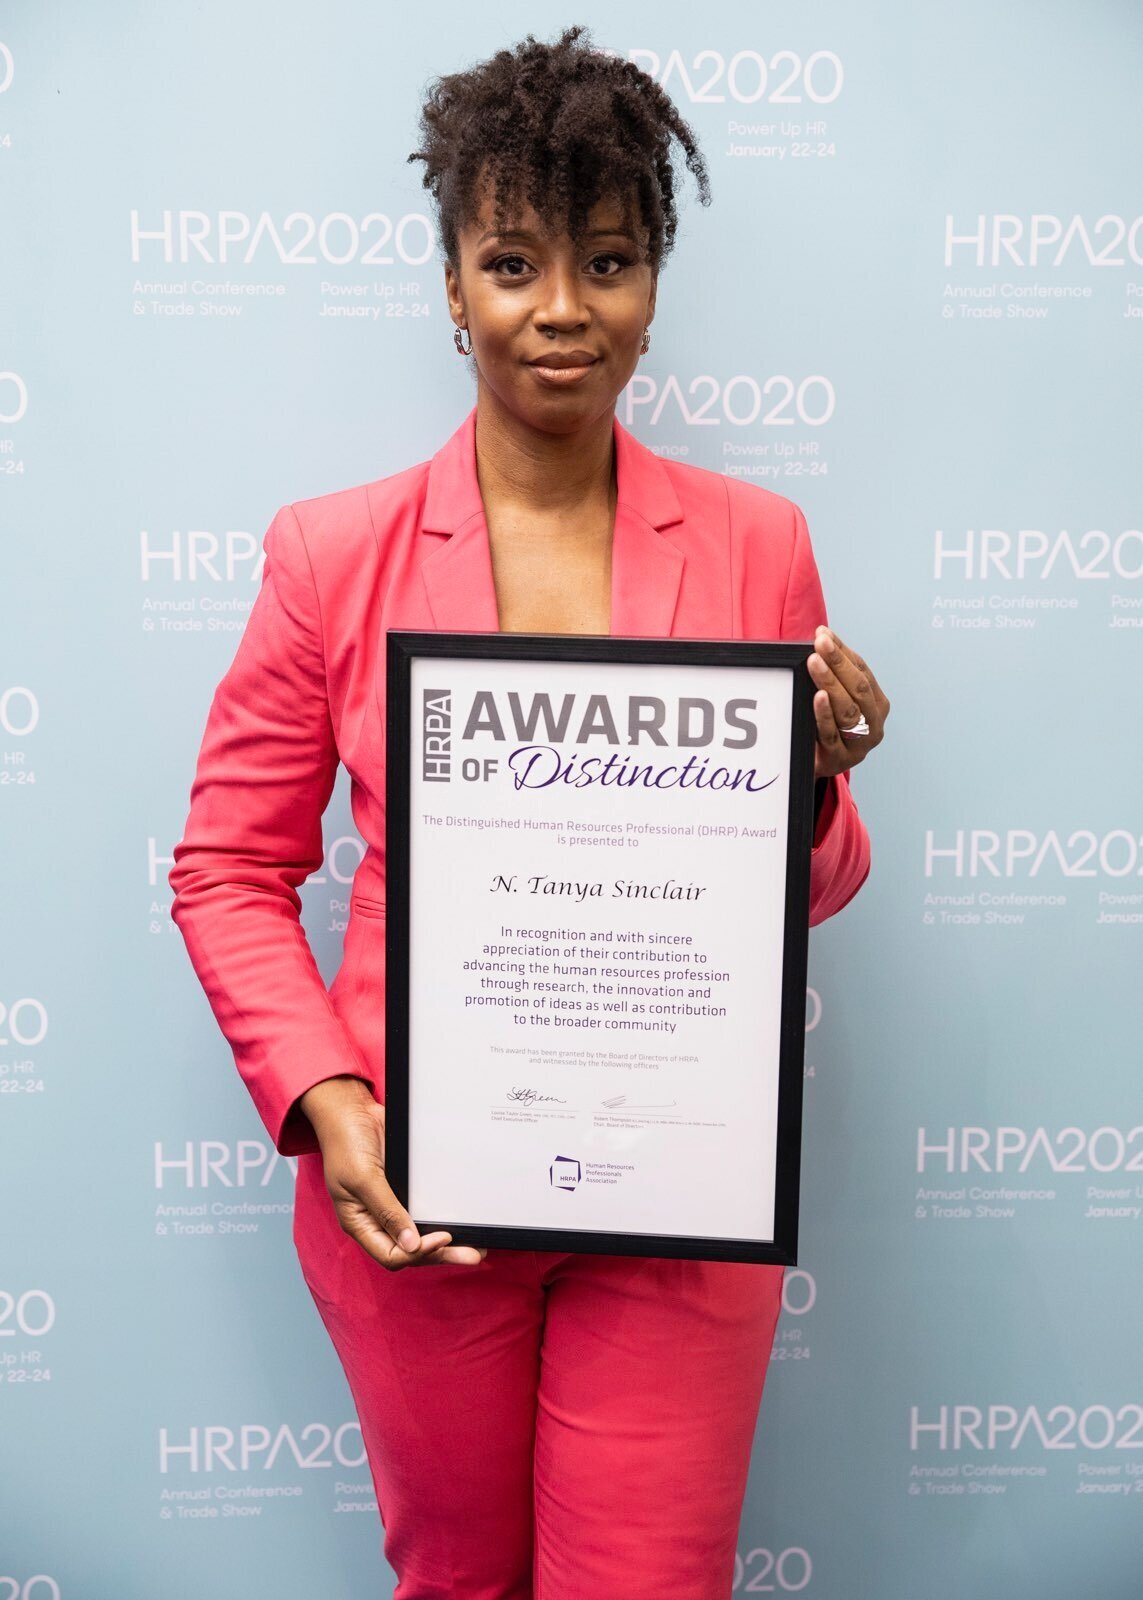 Tanya Sinclair is the first woman of colour to win the HRPA Award of Distinction